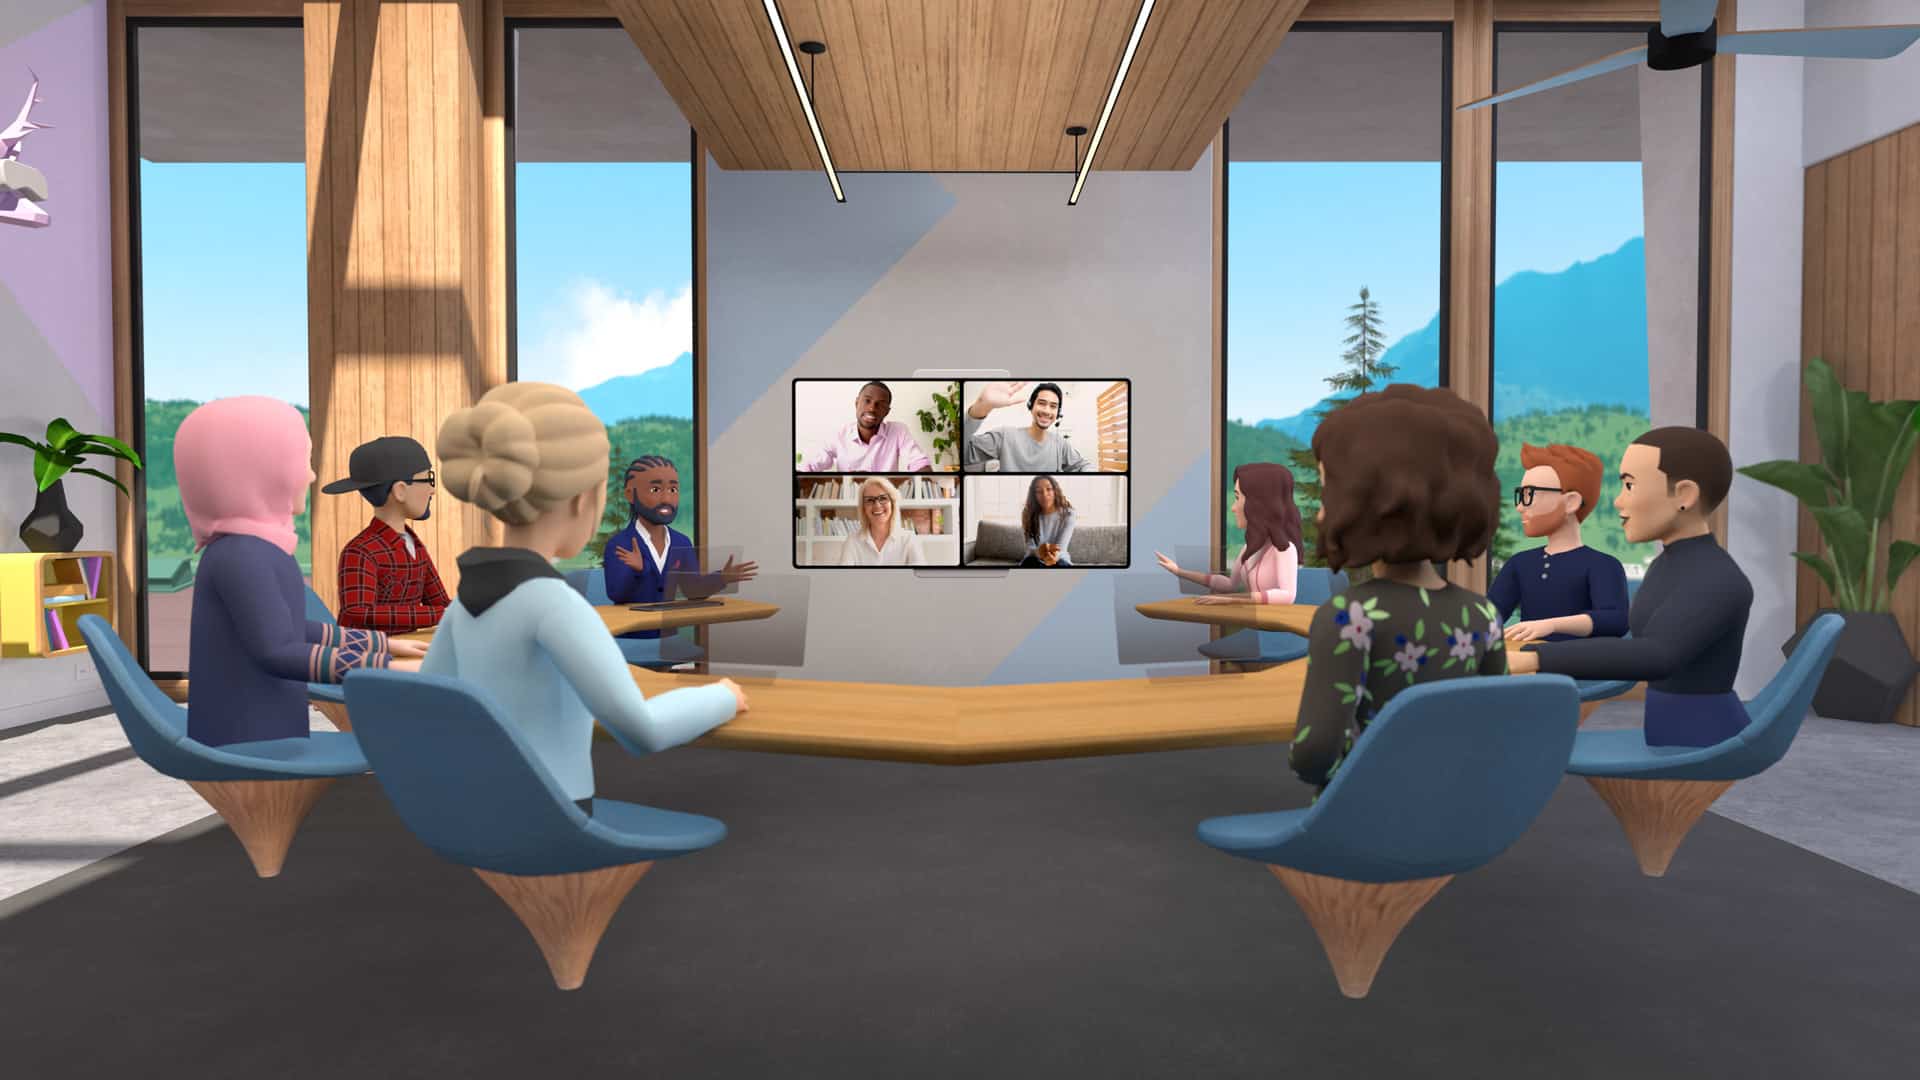 Facebook launches Horizon Workrooms, a virtual reality app for the “new normal”